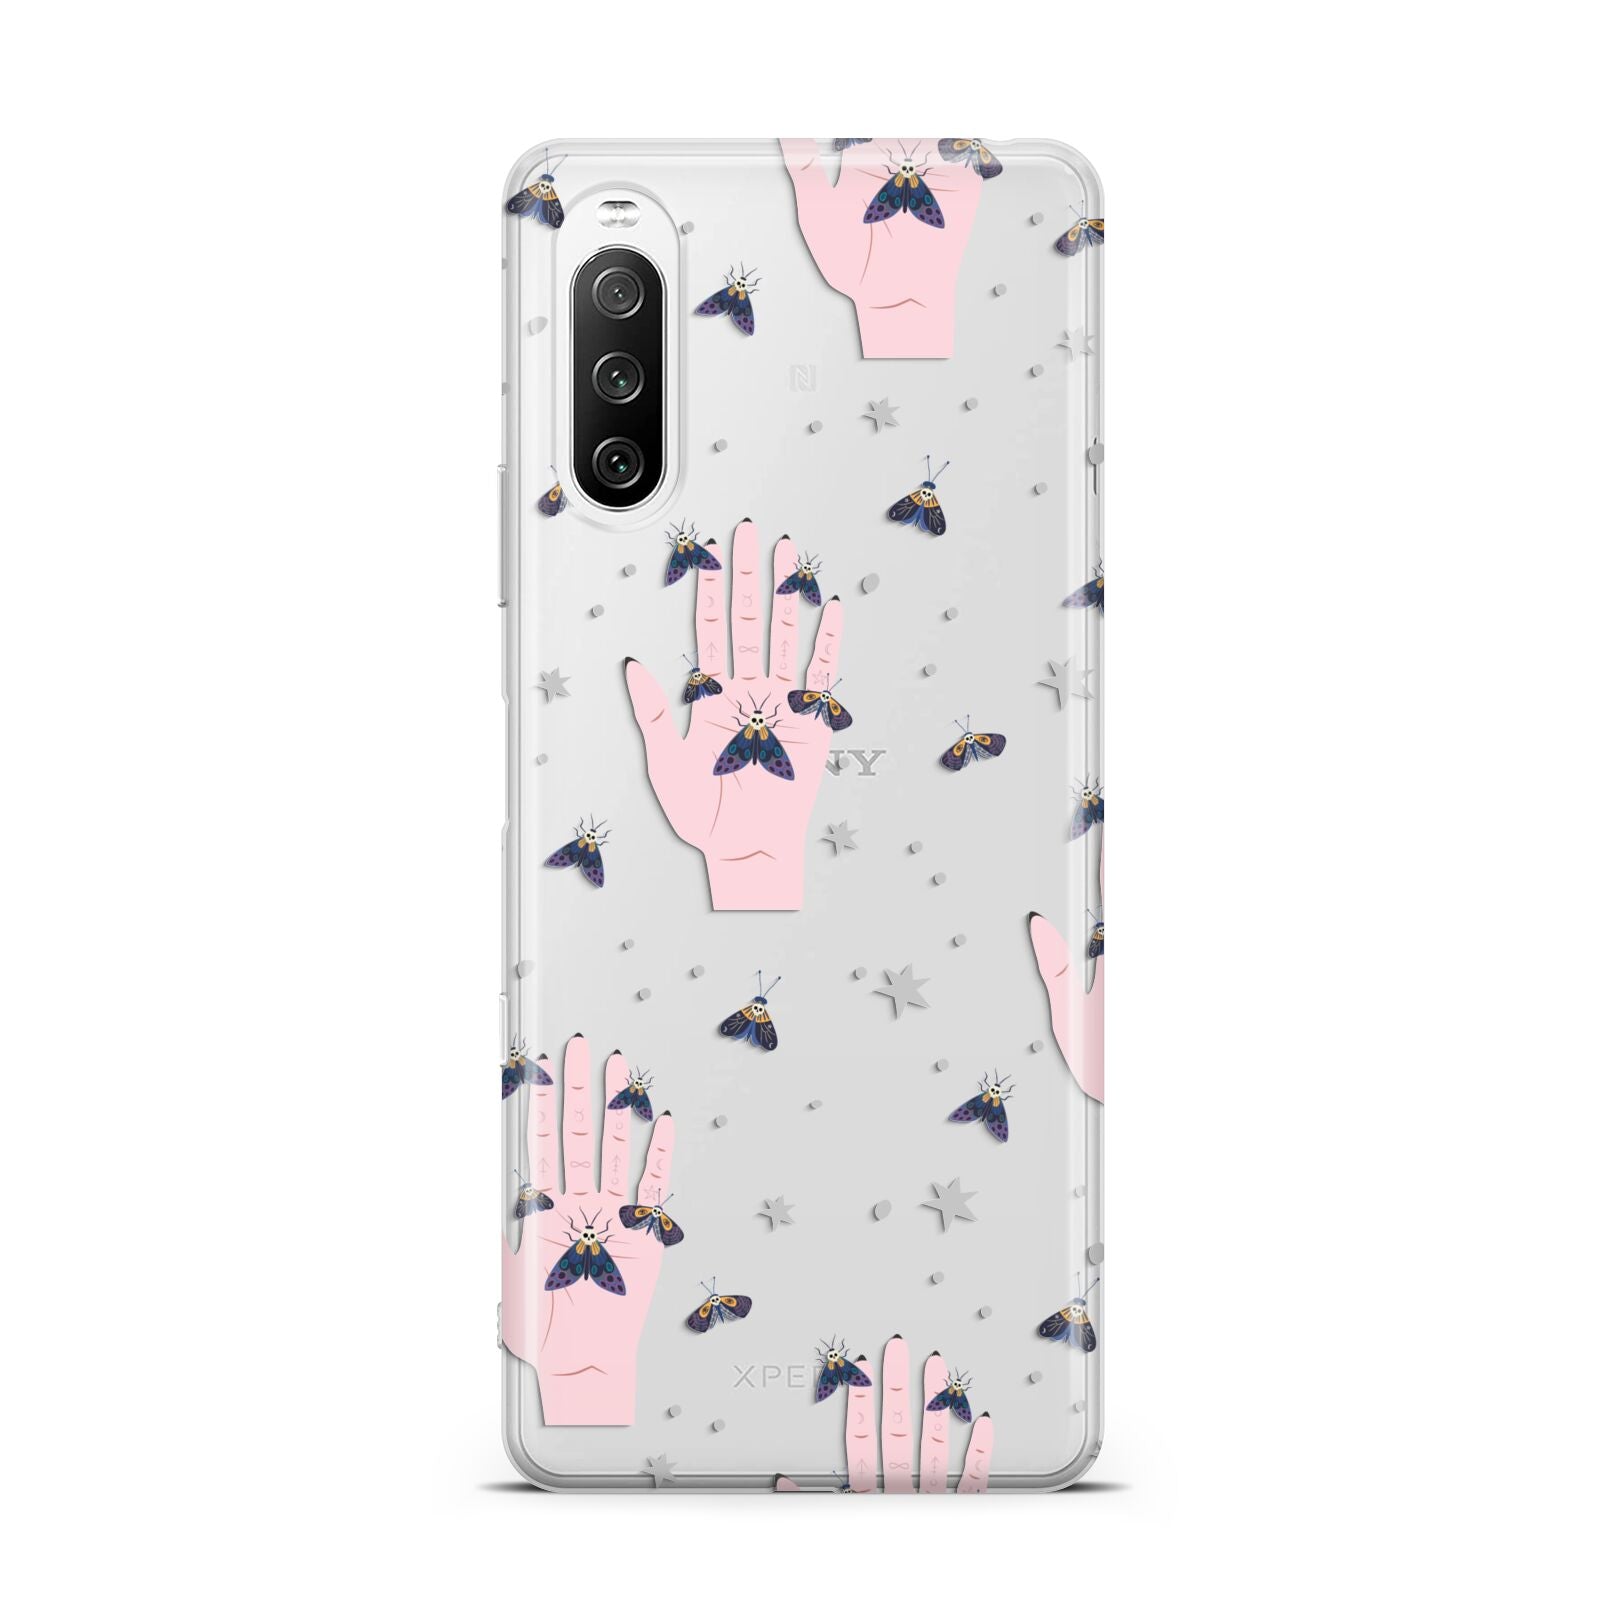 Fortune Teller Hands and Skull Moths Sony Xperia 10 III Case